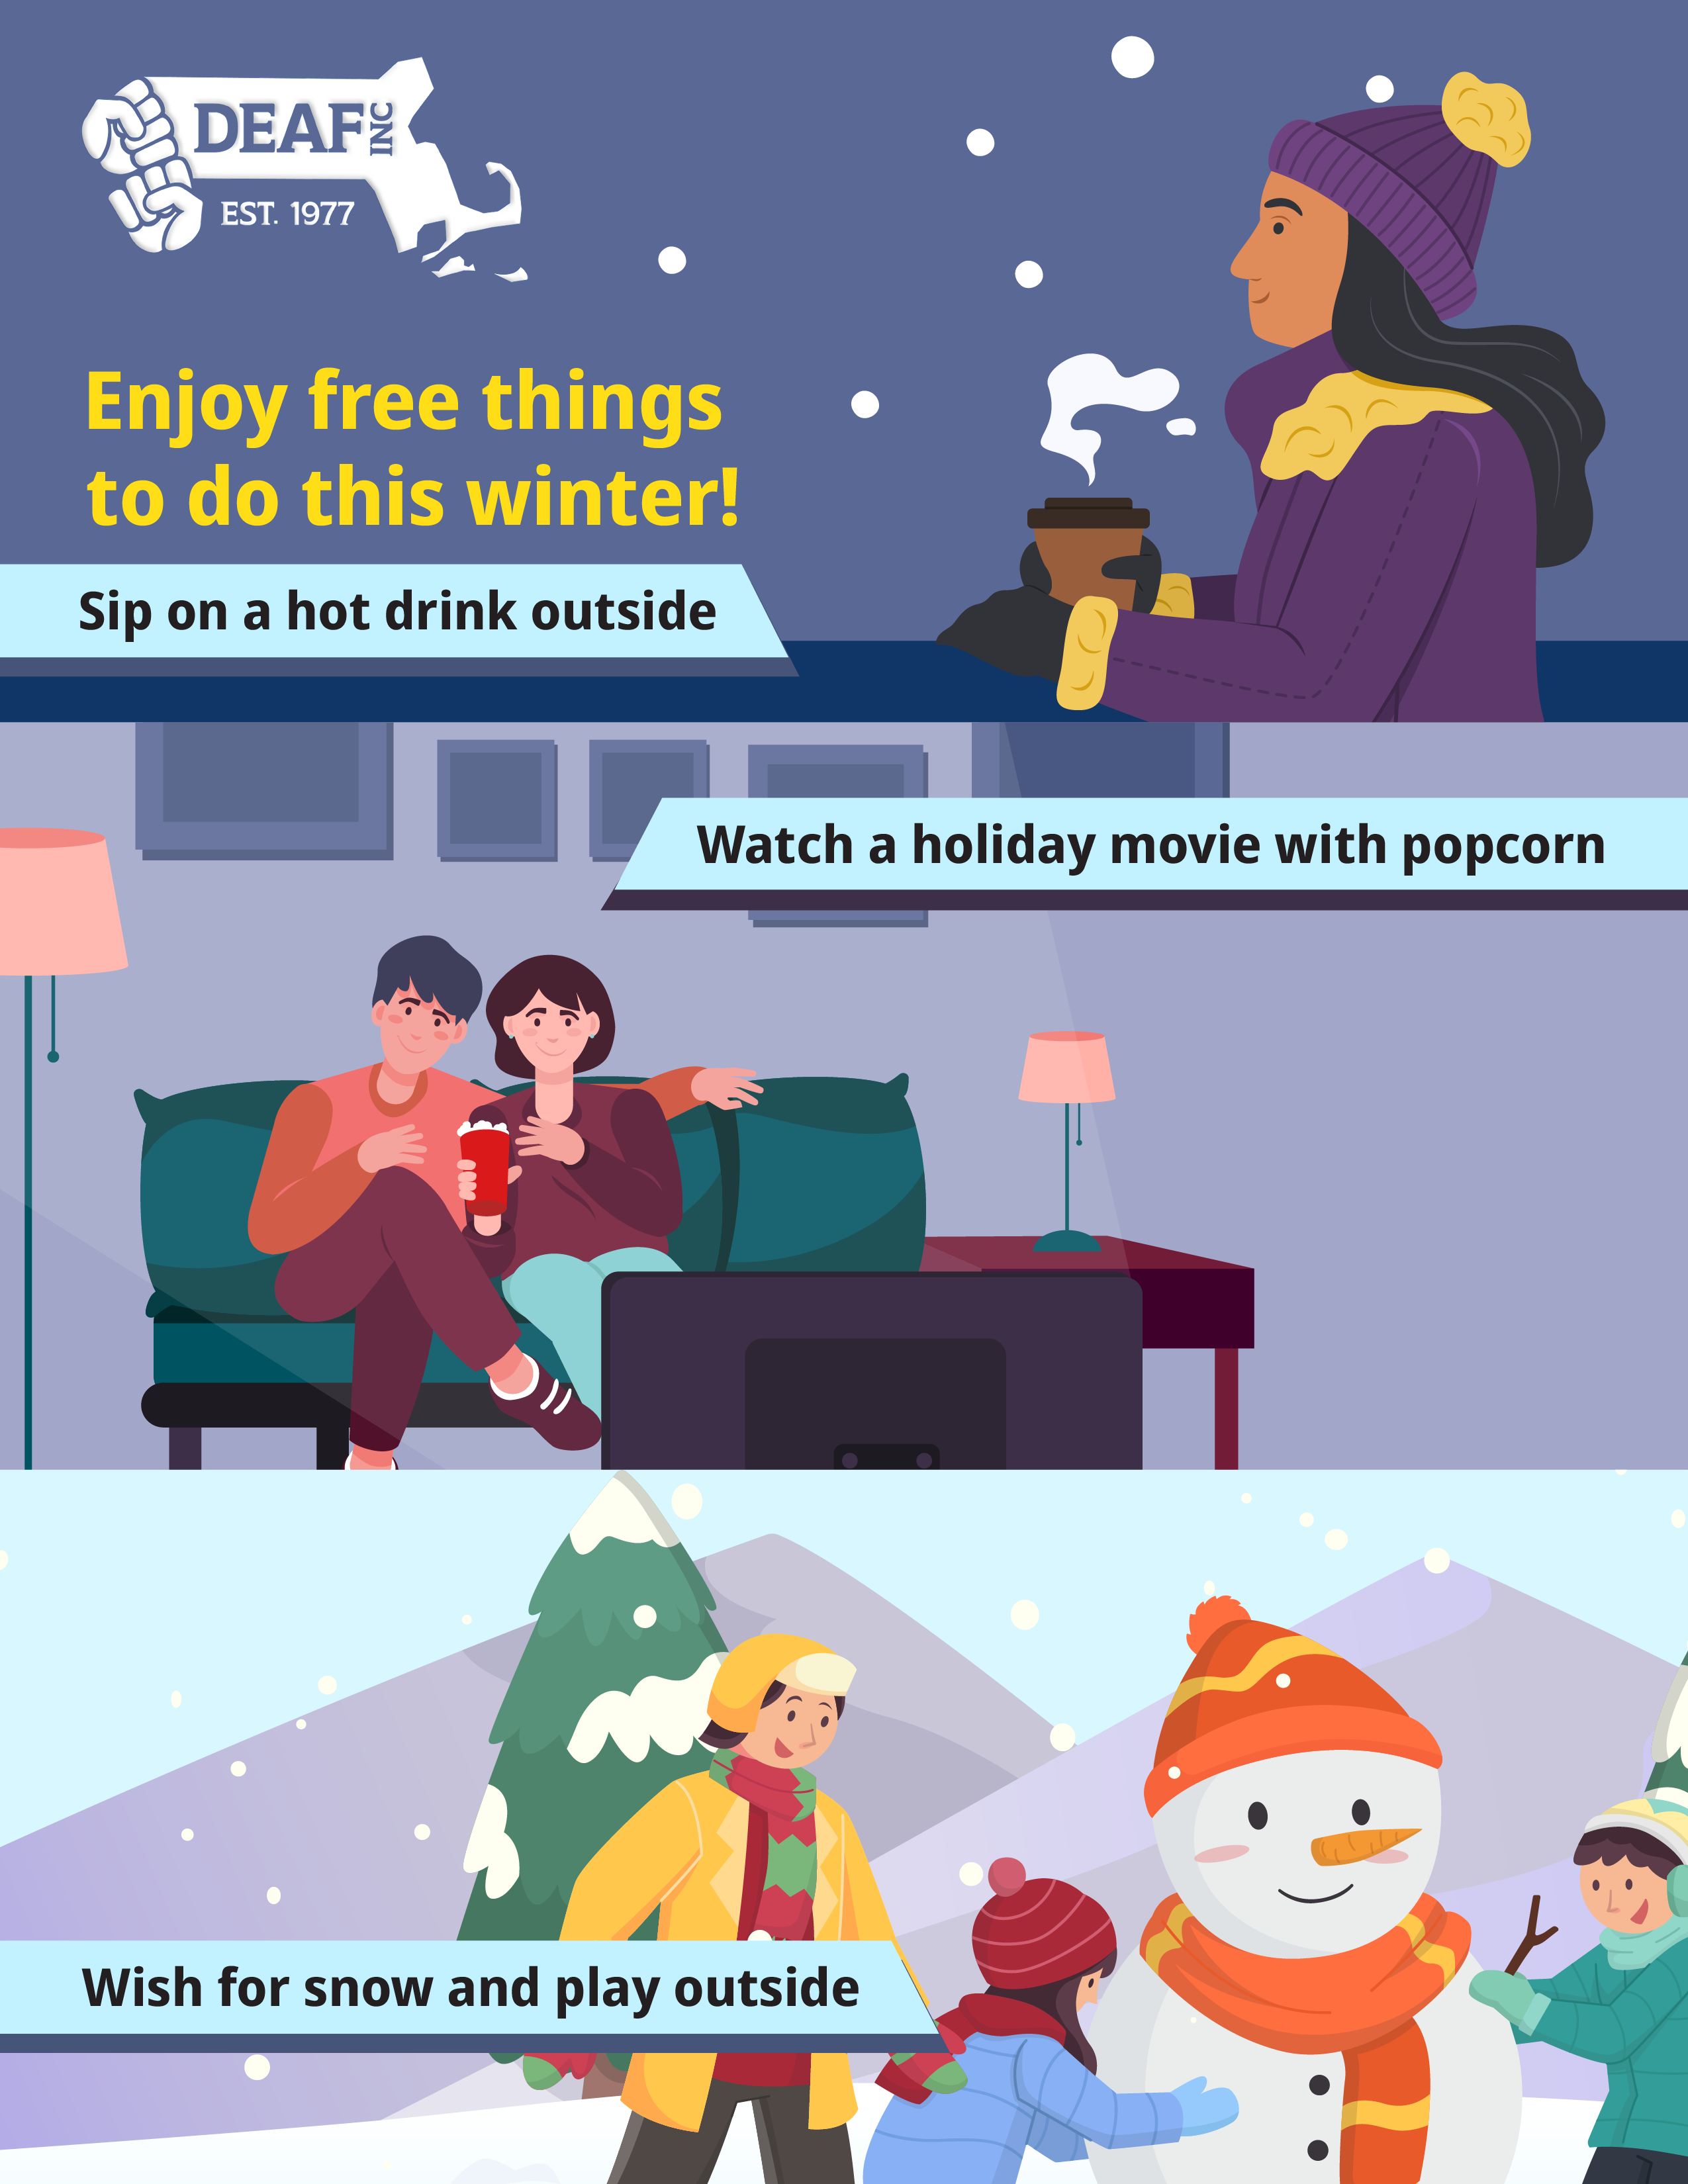 A winter flyer showing off all activities people could be doing in the cold, drinking coffee, watching movies, build snowmen. The text reads, “Enjoy free things to do this winter! Sip on a hot drink outside Watch a holiday movie with popcorn Wish for snow and play outside” At the very top of the flyer to the left is the DEAF, Inc. logo